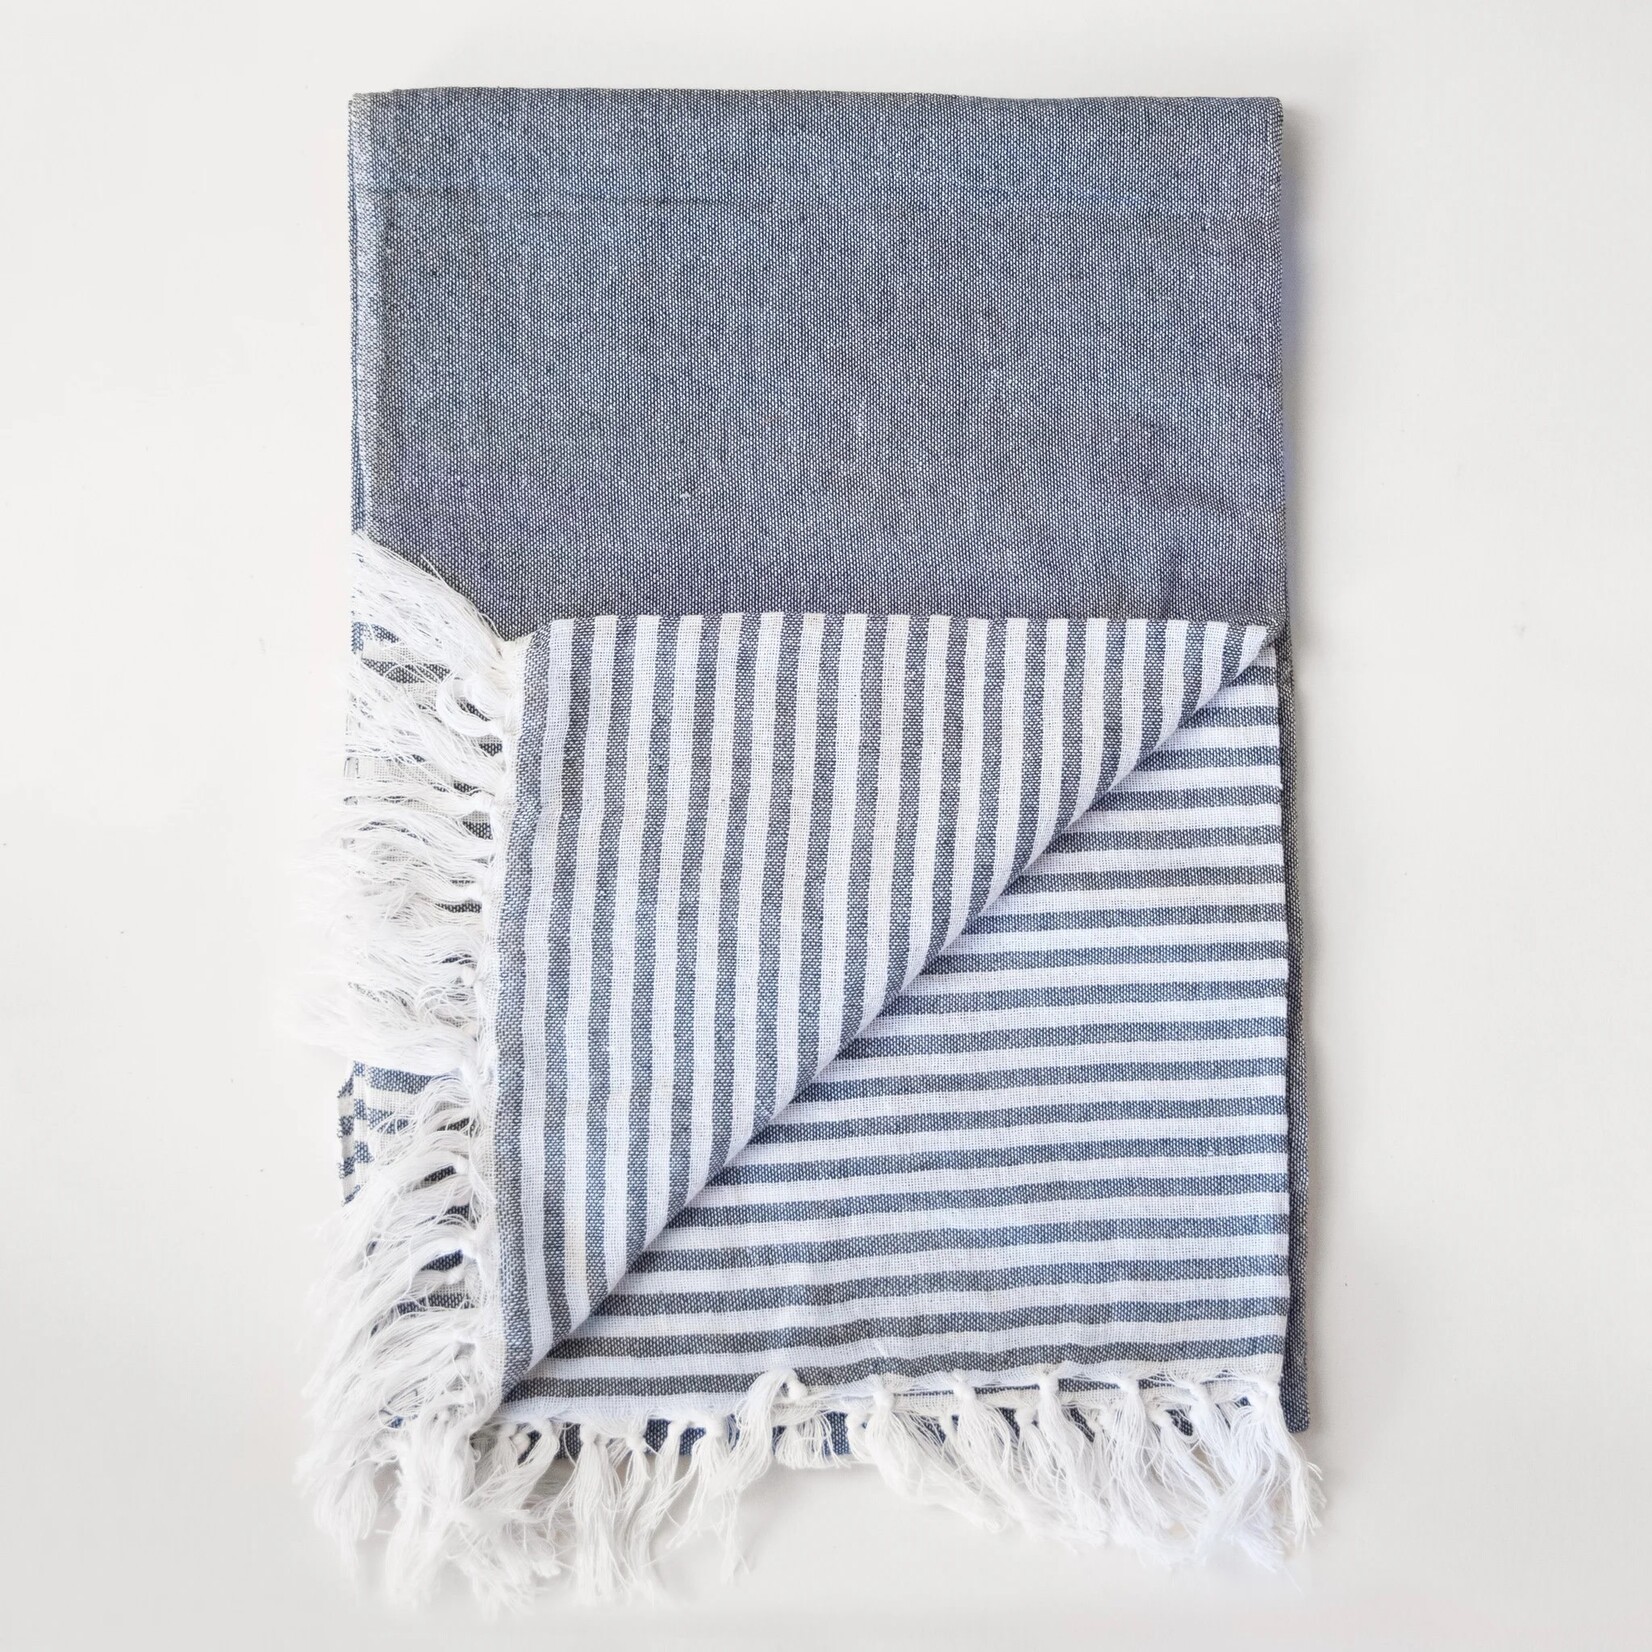 Reversible Charcoal Striped Throw, 60 X 48"